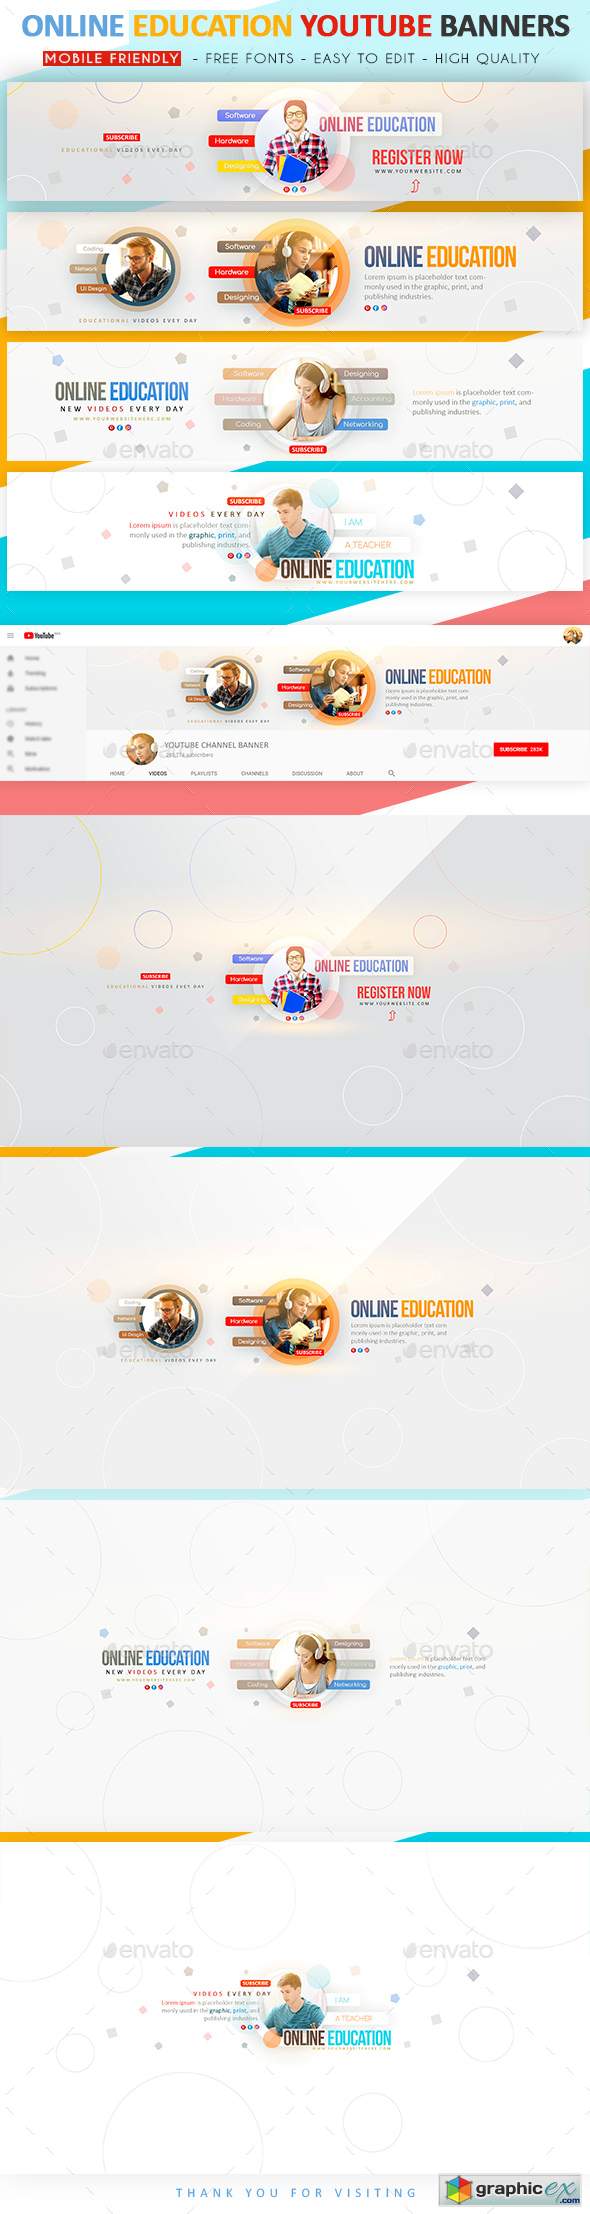 Online Education YouTube Banner » Free Download Vector Stock Image